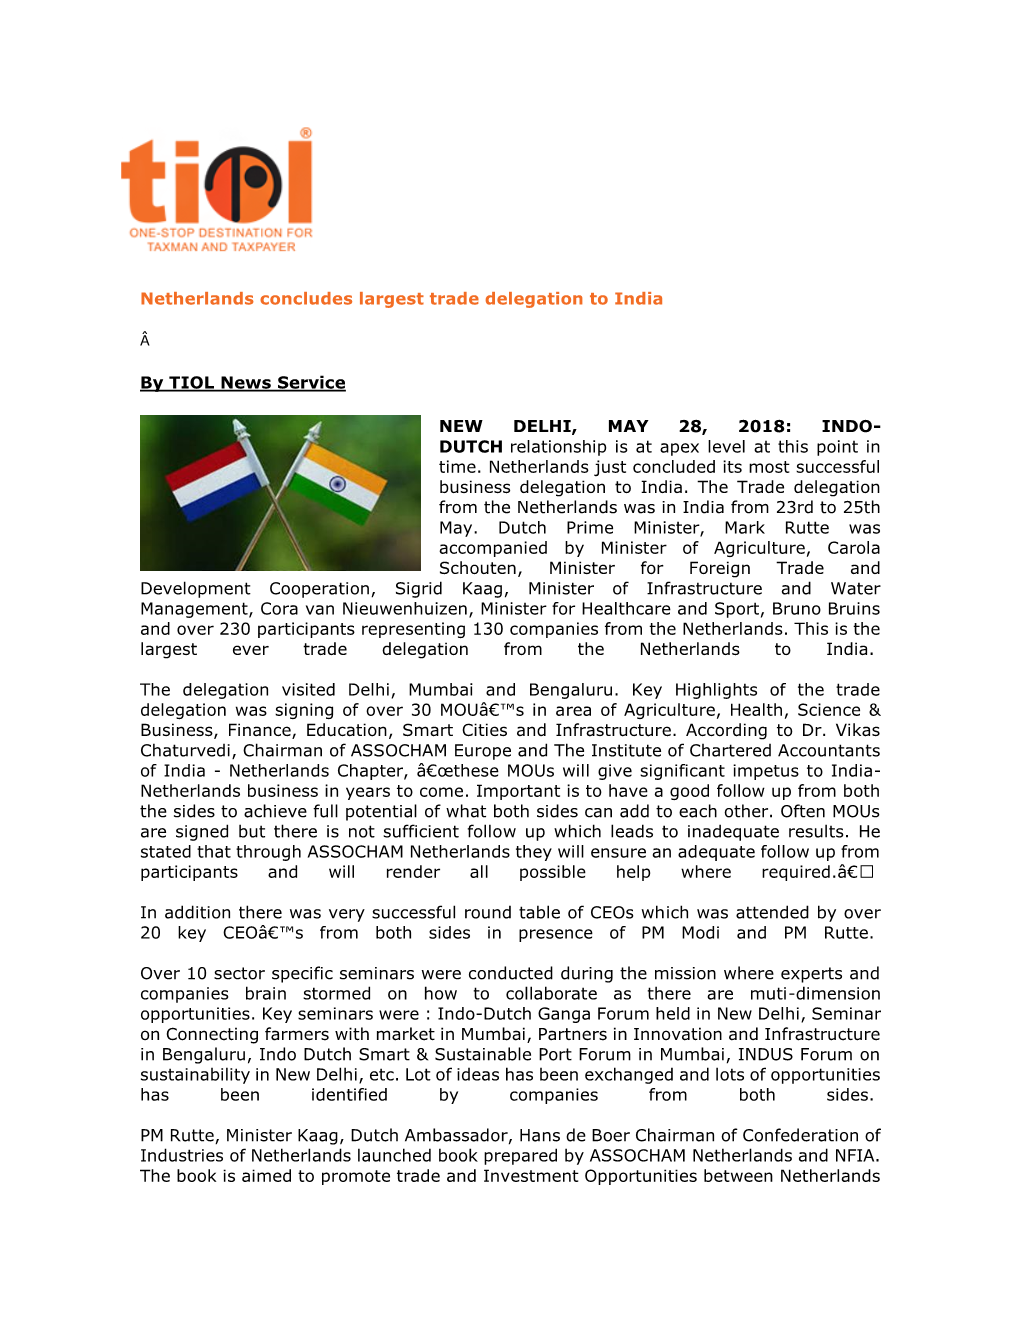 Netherlands Concludes Largest Trade Delegation to India by TIOL News